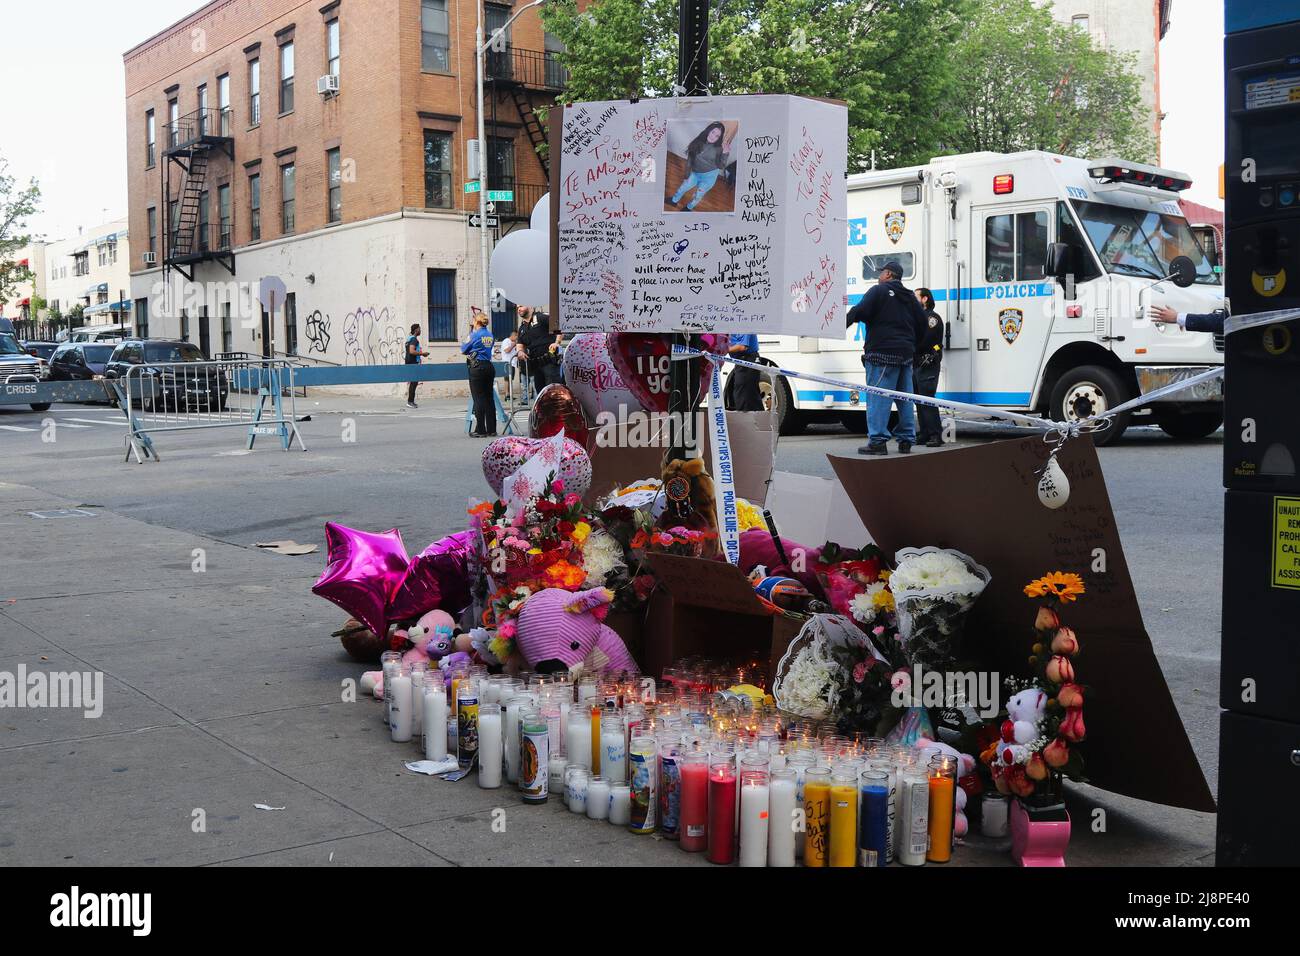 Sidewalk Memorial for 11-Year-Old Killed in Shooting Grows, New York, NY USA Stock Photo